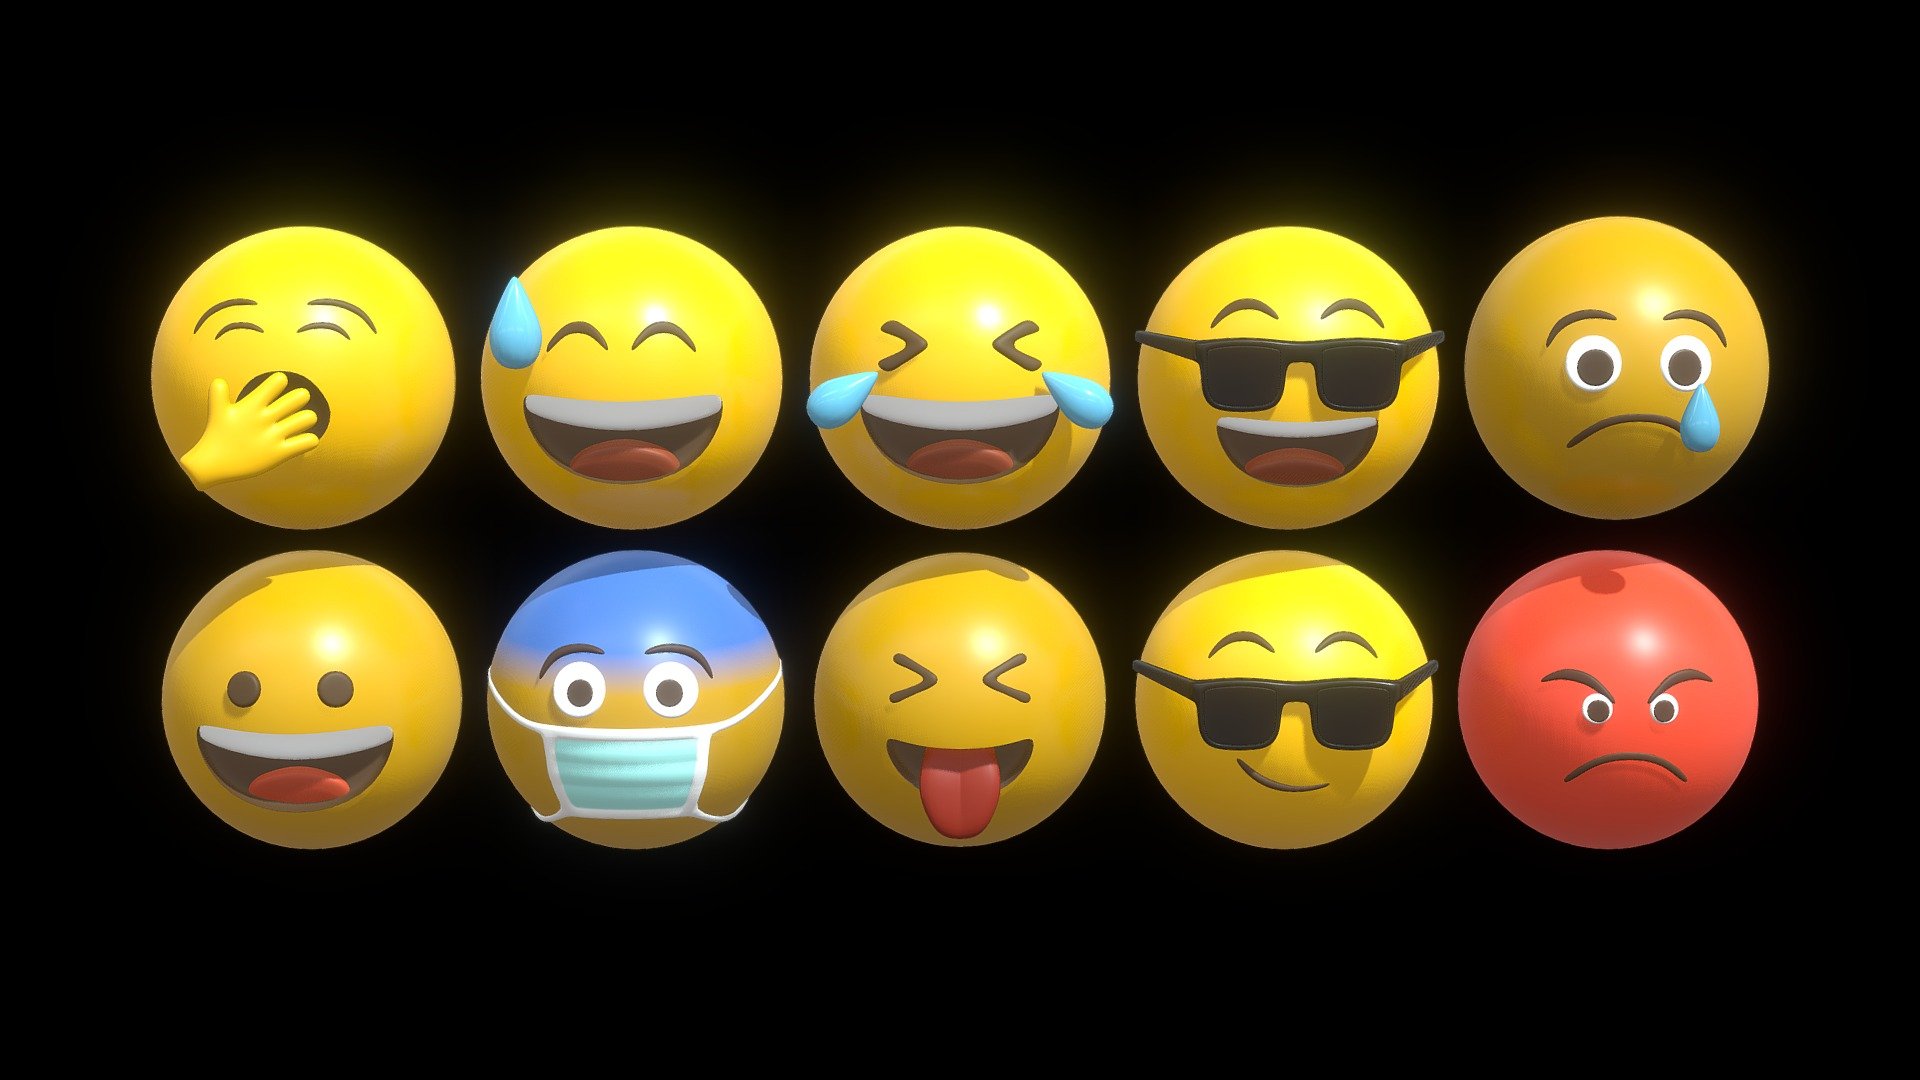 Emoticon List :
1. Cooler Than You
2. Awkward
3. Yawning
4. Laugh Out Loud
5. Smile
6. Smirking Cool
7. Wearing Mask
8. Angry
9. Tongue Out
10. Sad with Tears

For TEXTURE include the DIFFUSE AND ROUGHNESS, but if want to tweak the color it's just using the principled bsdf in the blender file

each Emoticon exported to an FBX, OBJ, DAE, GLB/GLTF and STL format

in the blender file i just included the lighting setting for rendering just like the preview image - 10 Emoticon Yellow Ball Pack Part 1 - Buy Royalty Free 3D model by pakyucangkun 3d model